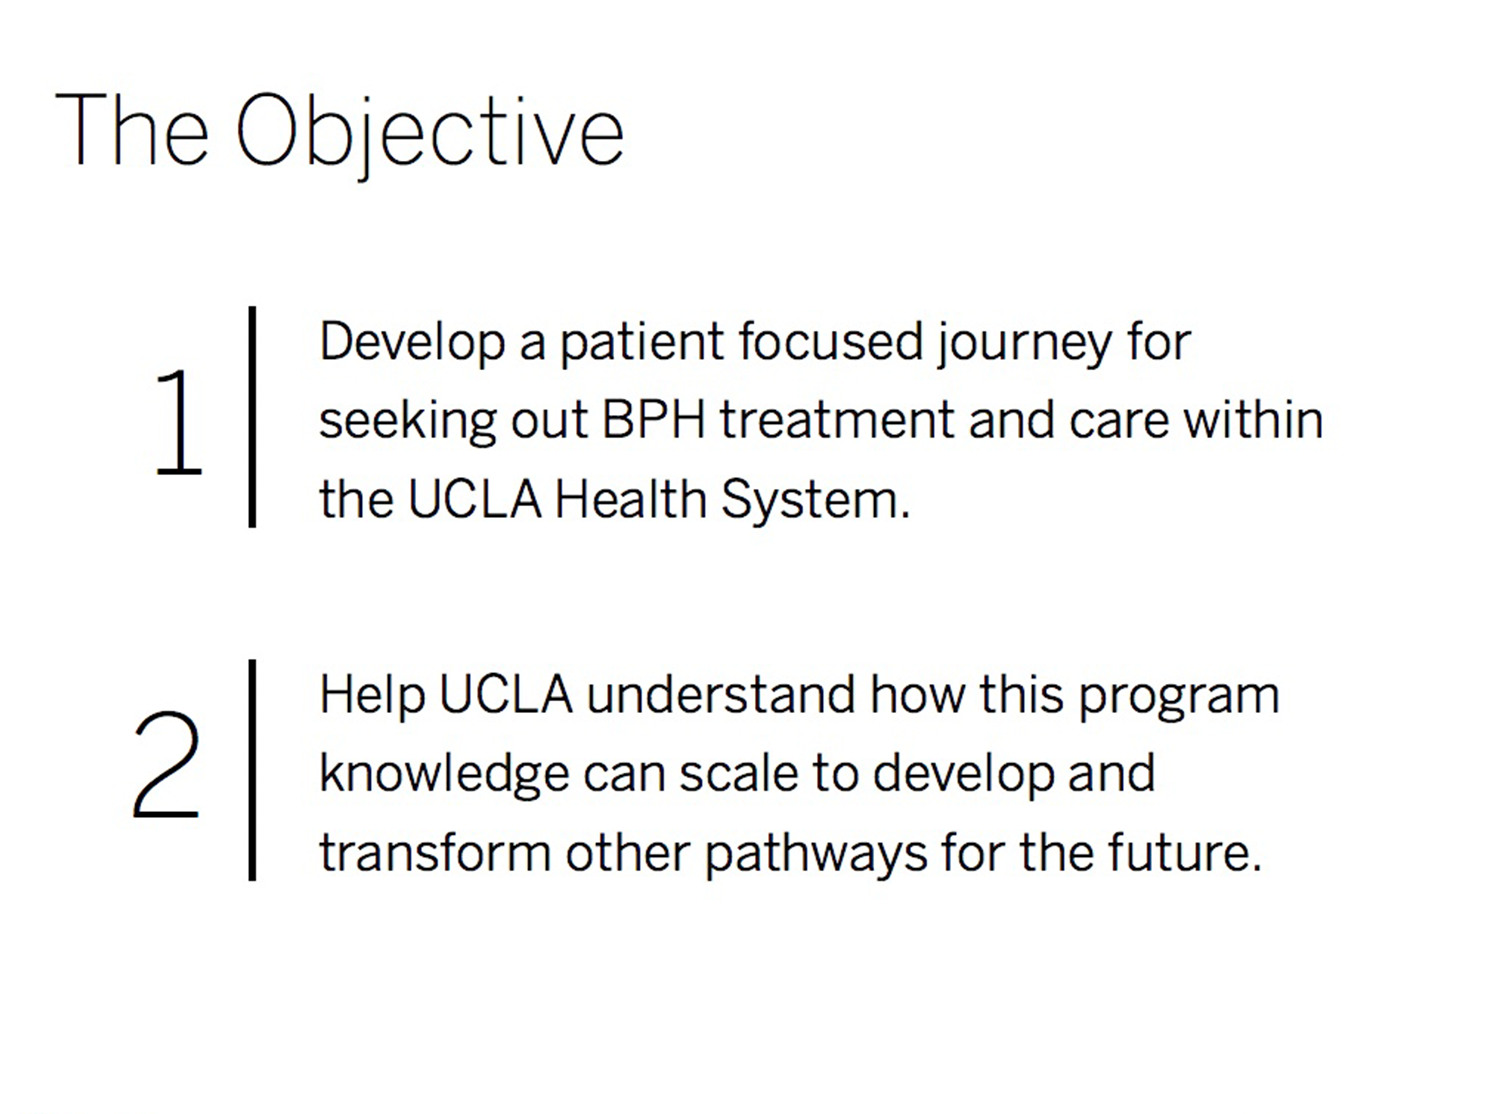 UCLA Health: The future of patient experience